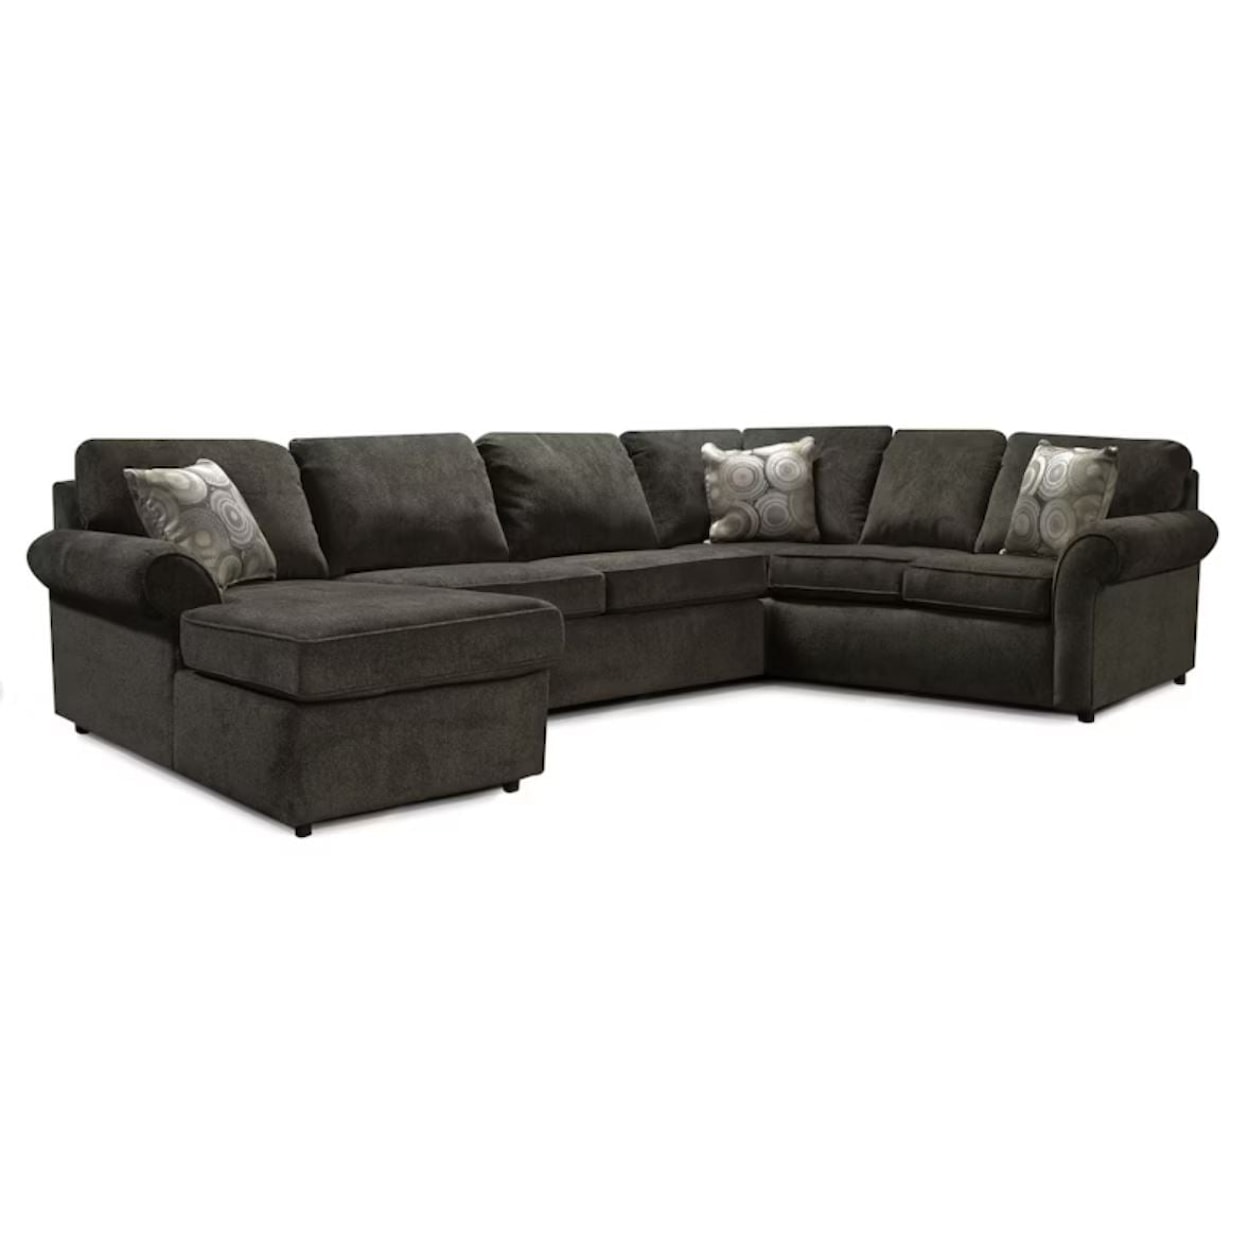 England Moonview Sectional